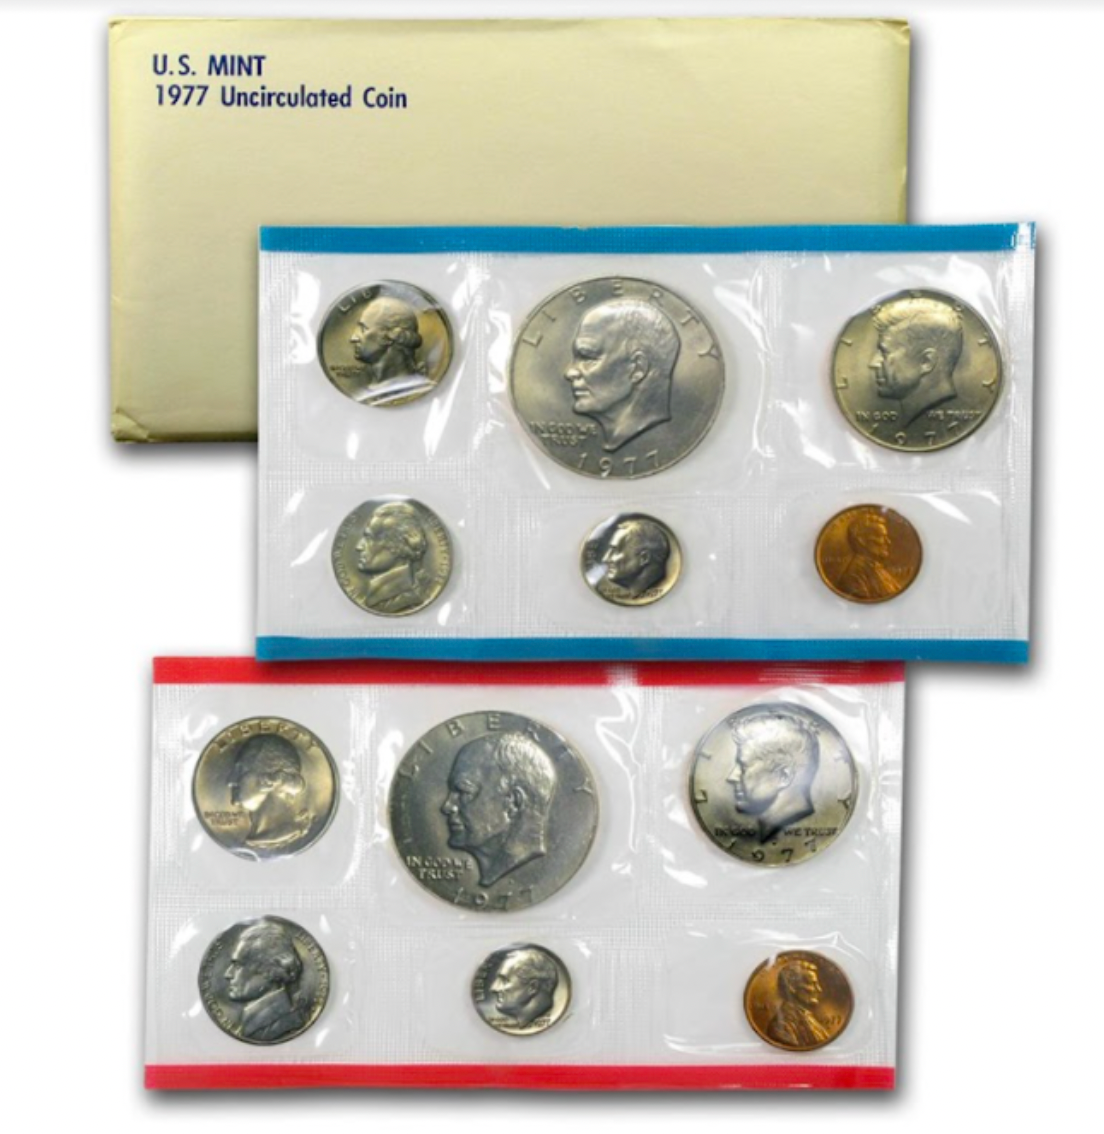 1977 United States Mint Uncirculated Coin Set. 12 coins total.